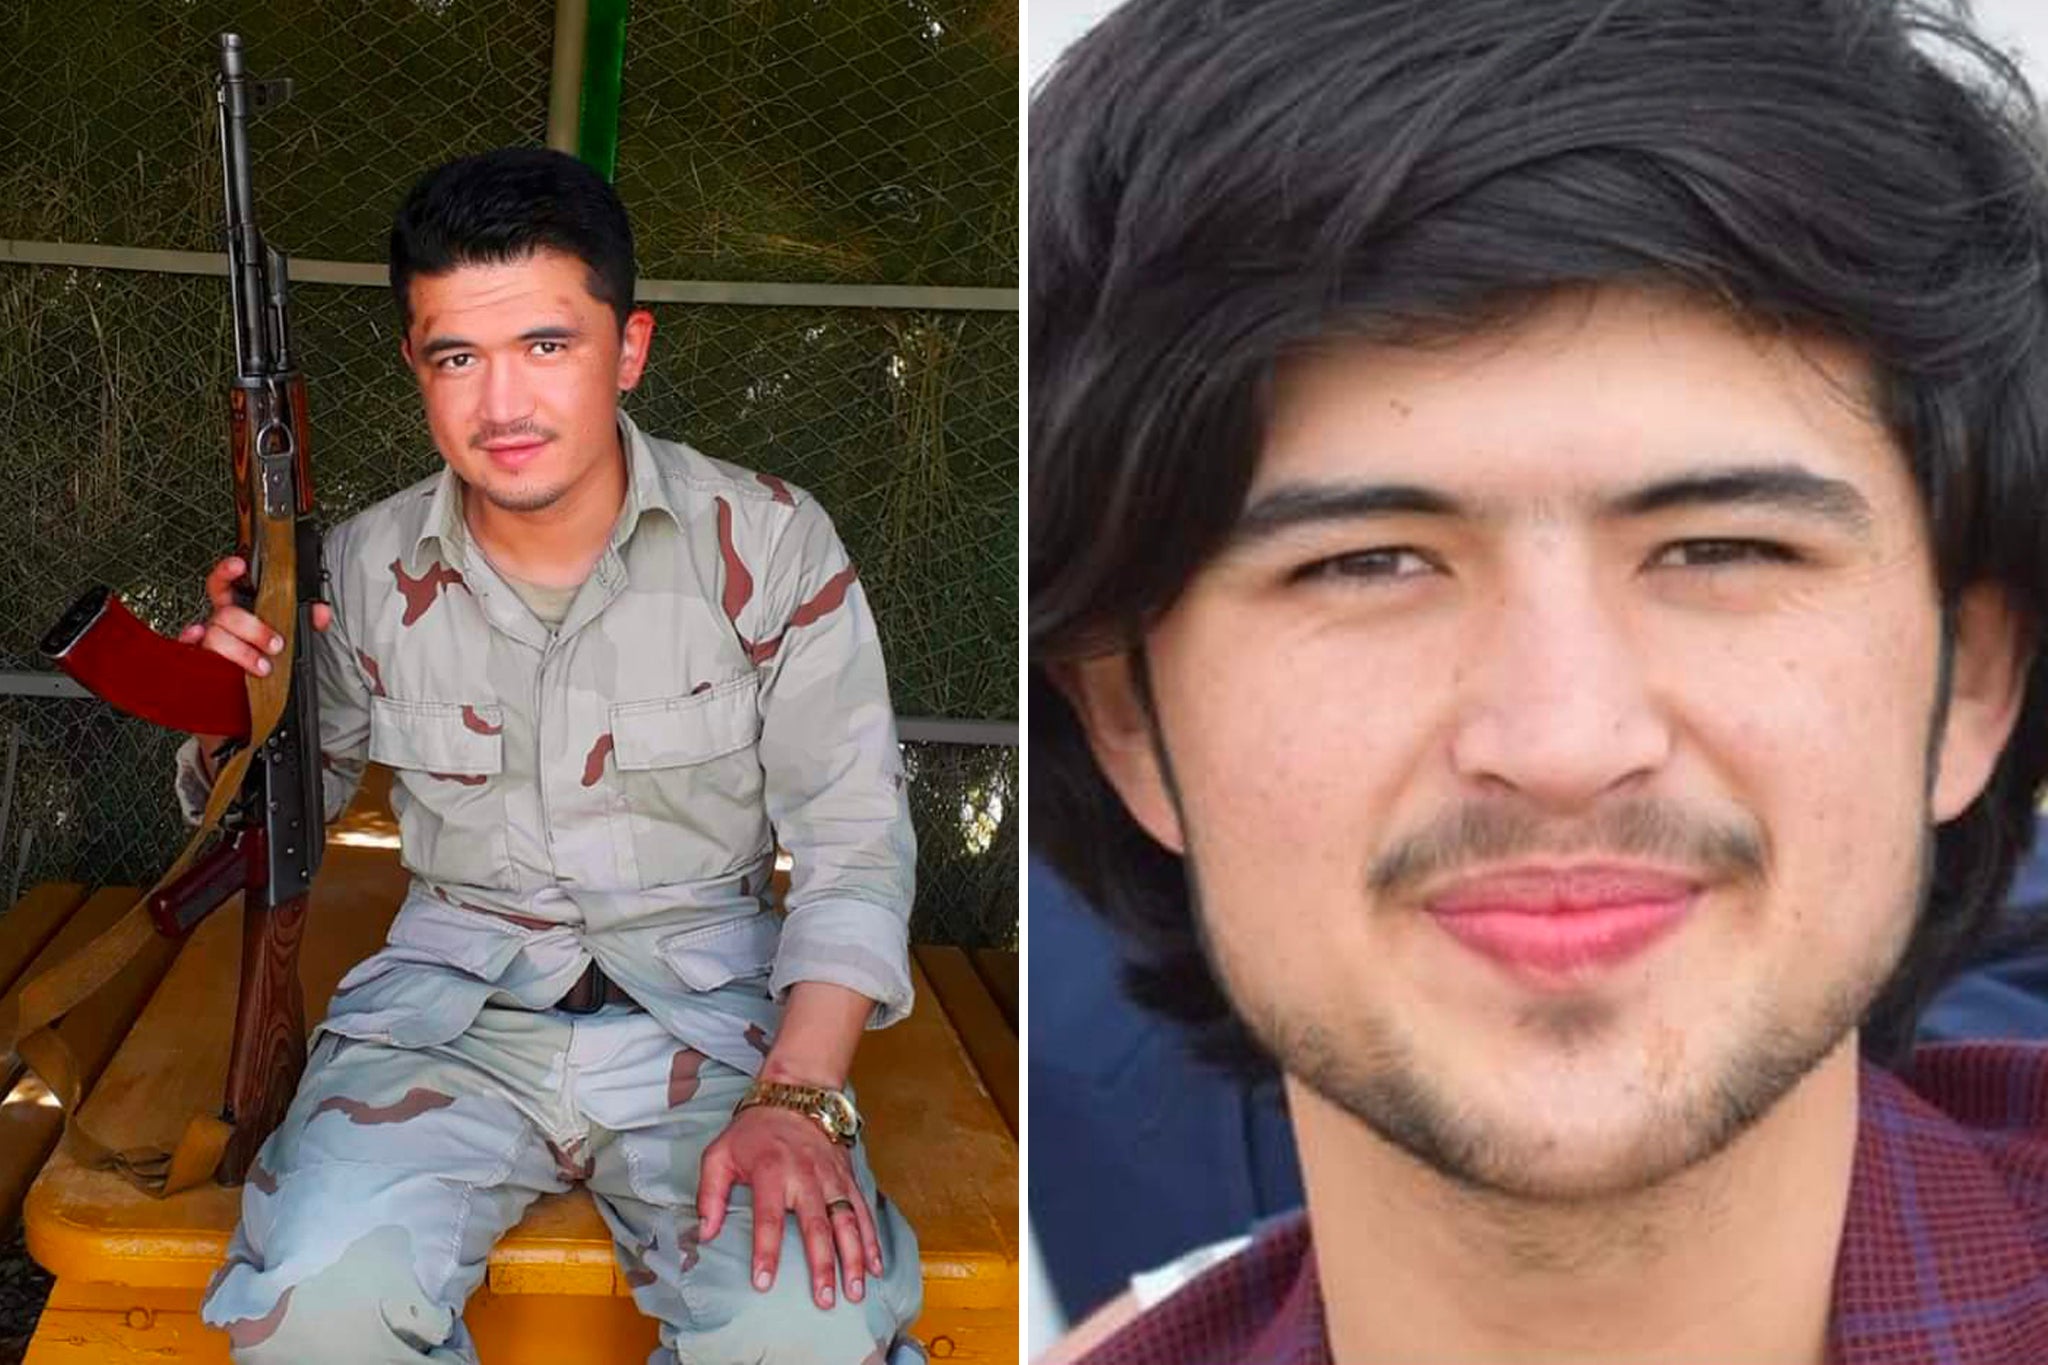 Mohammad Qoyash (left) was killed along with his brother Khair (right) as they fled Afghanistan